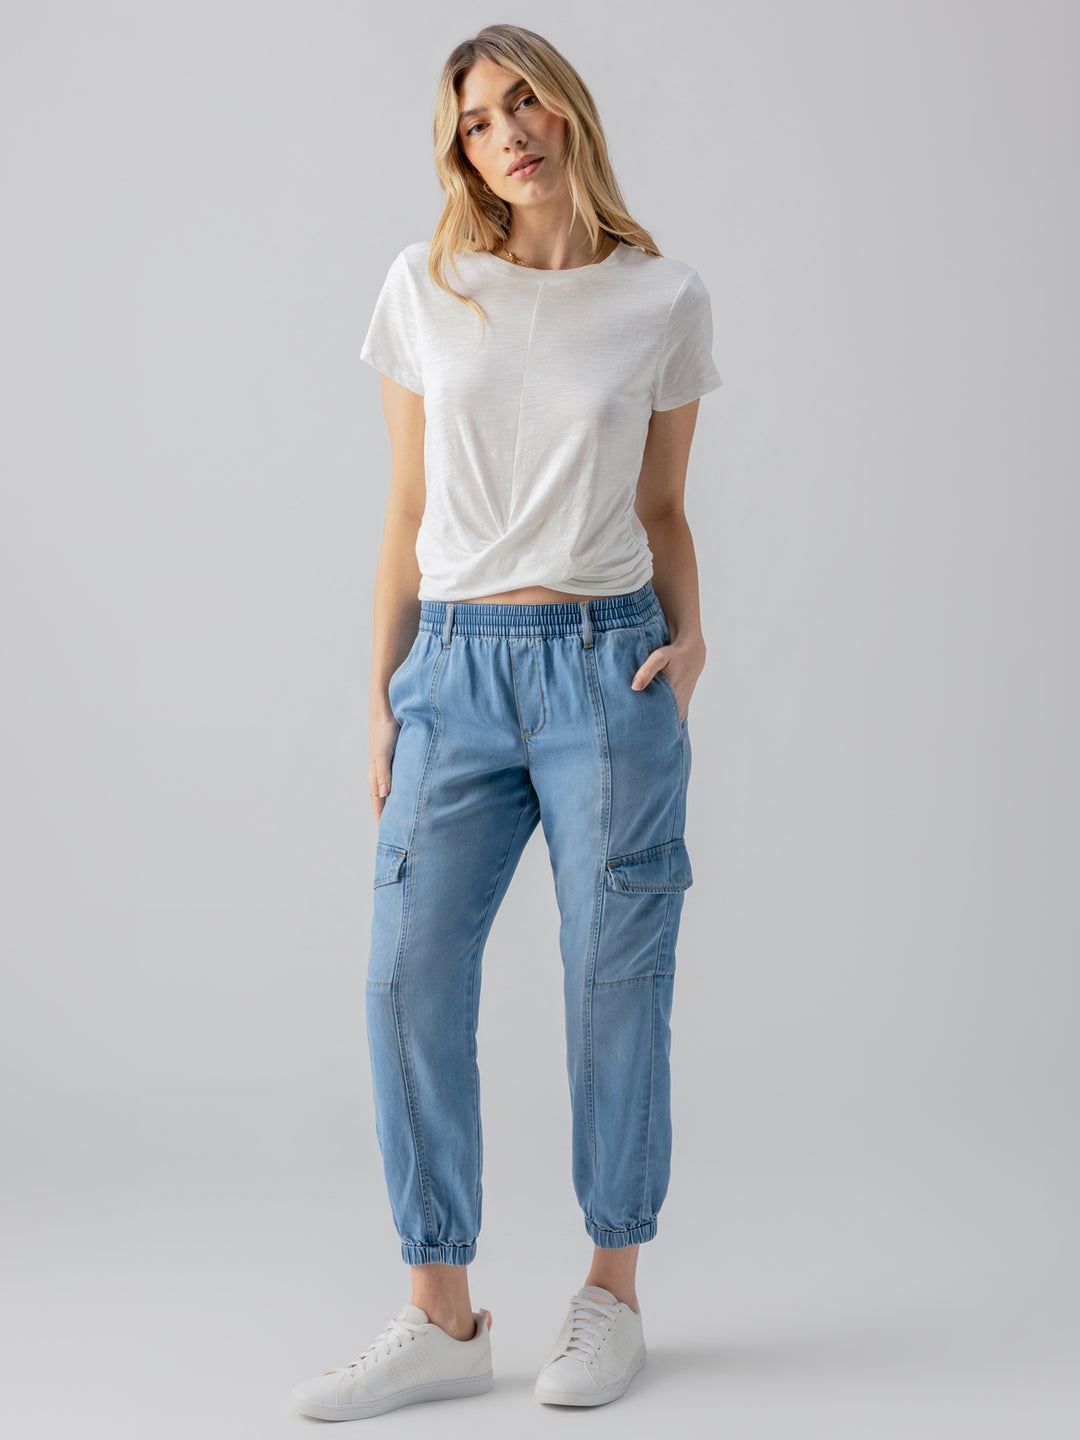 RELAXED REBEL PANT